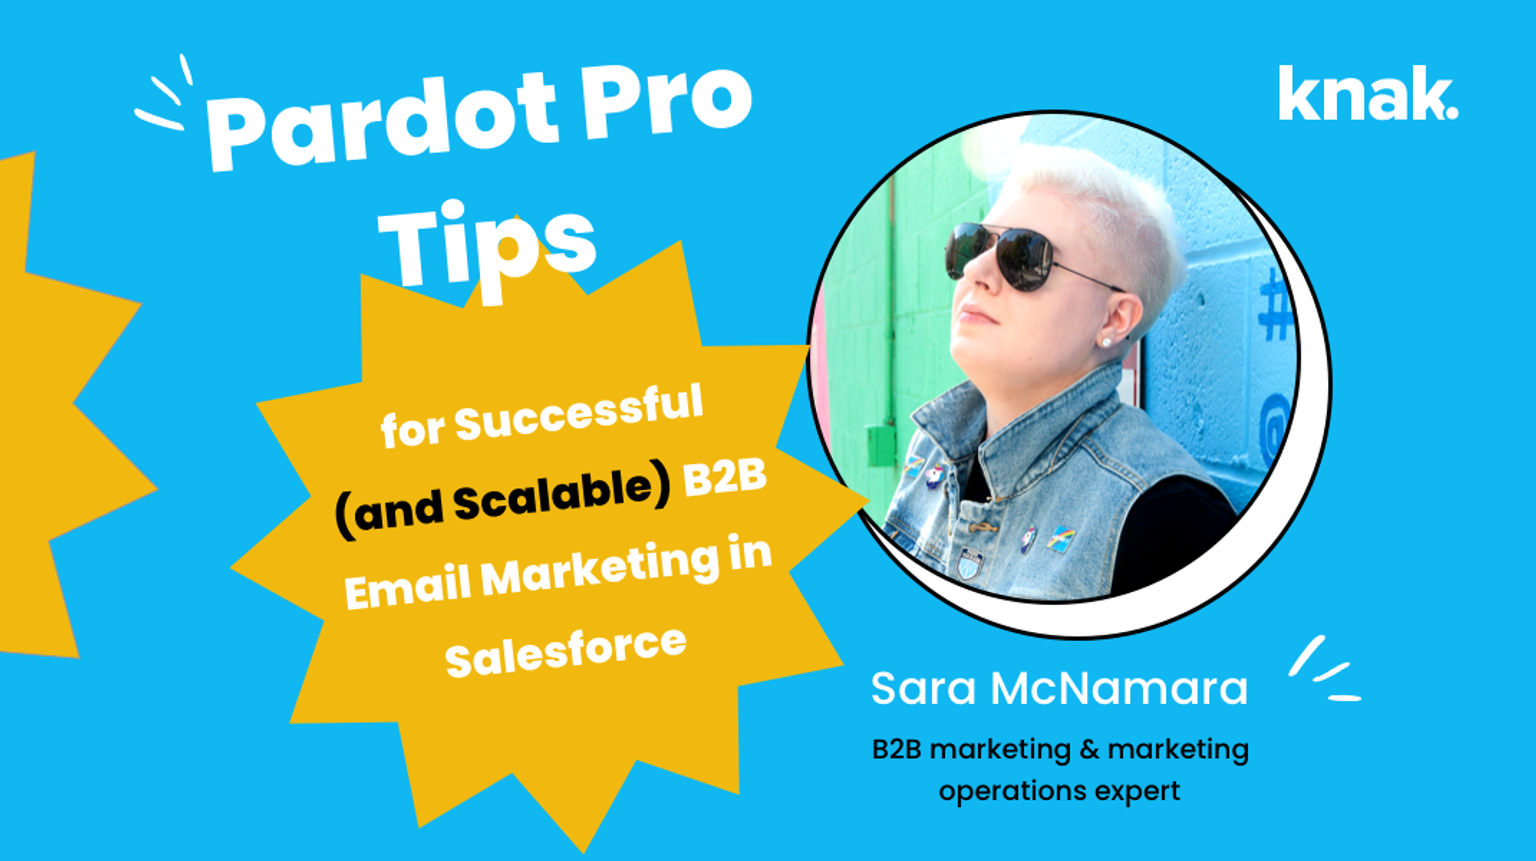 Pardot Pro Tips for Successful (and Scalable) B2B Email Marketing in Salesforce